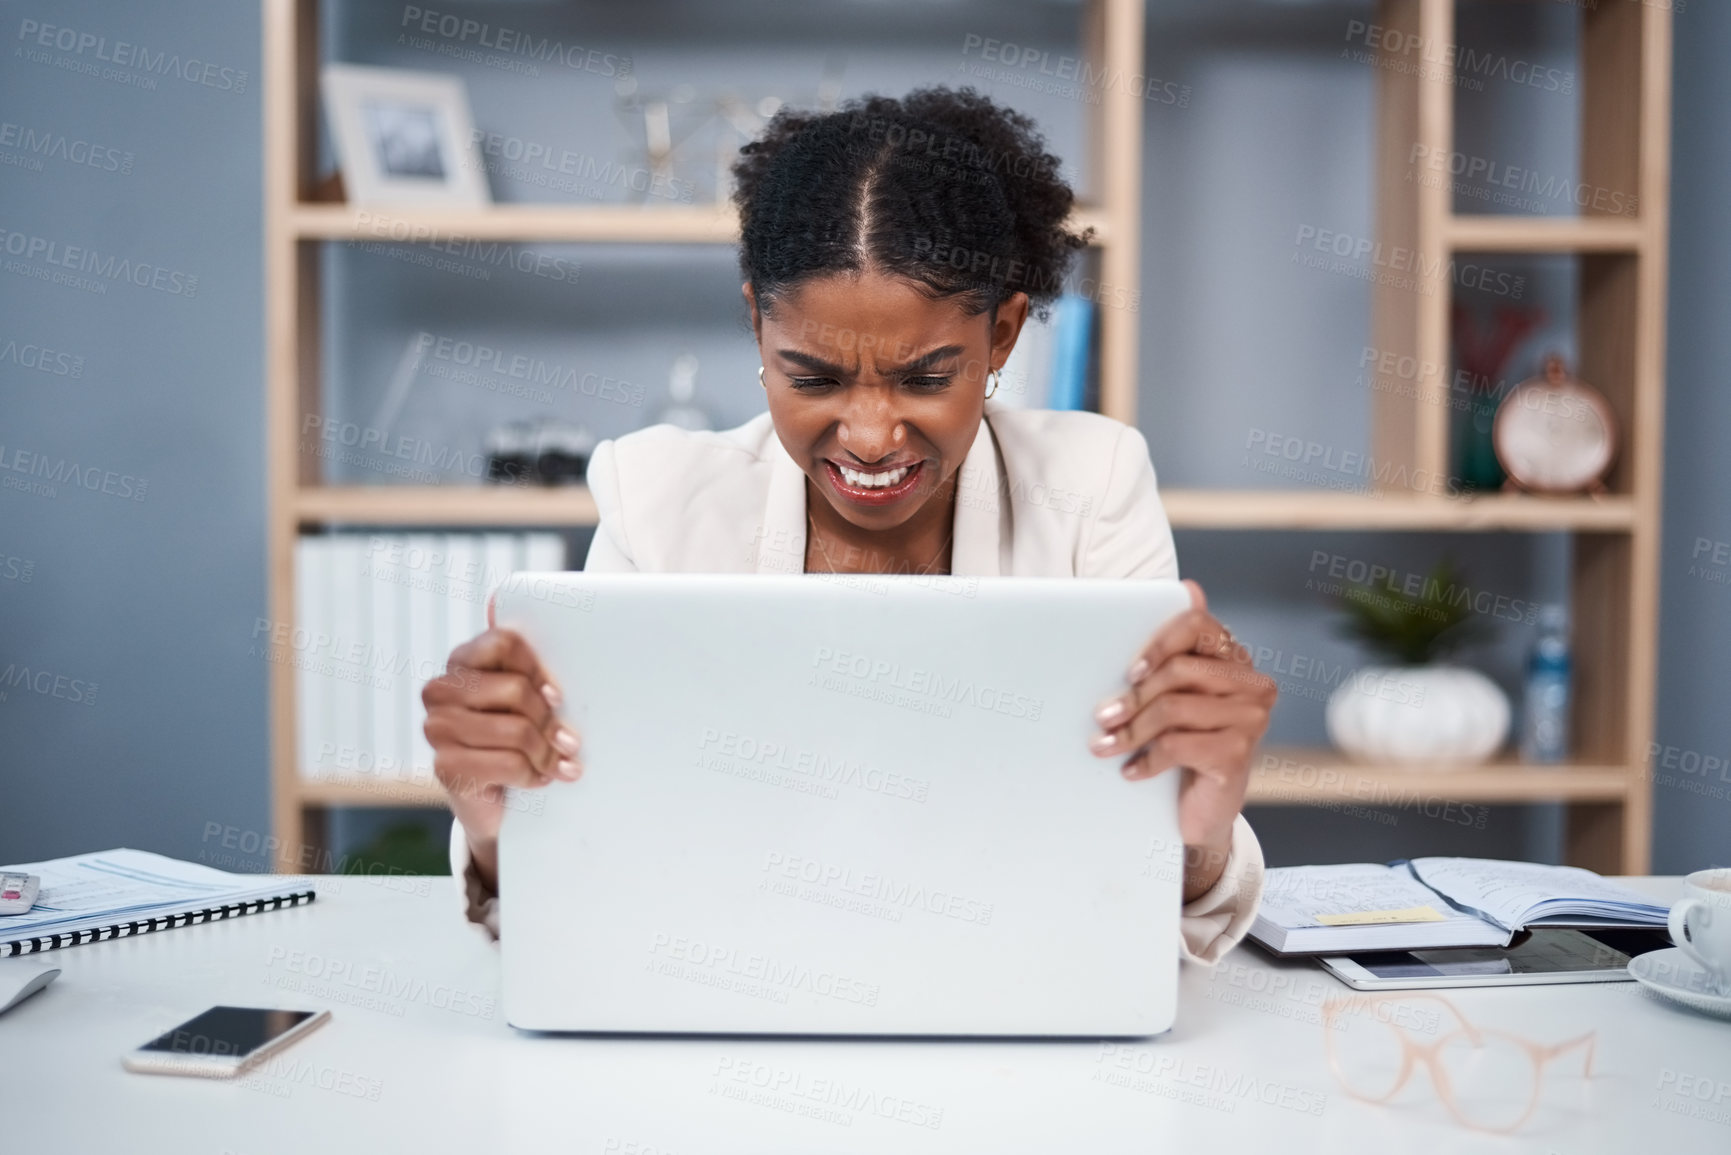 Buy stock photo Frustrated, angry and stressed young business woman on a laptop in a modern office. Female showing anger with technology at the workplace. Lady employee grabbing computer due to slow connection